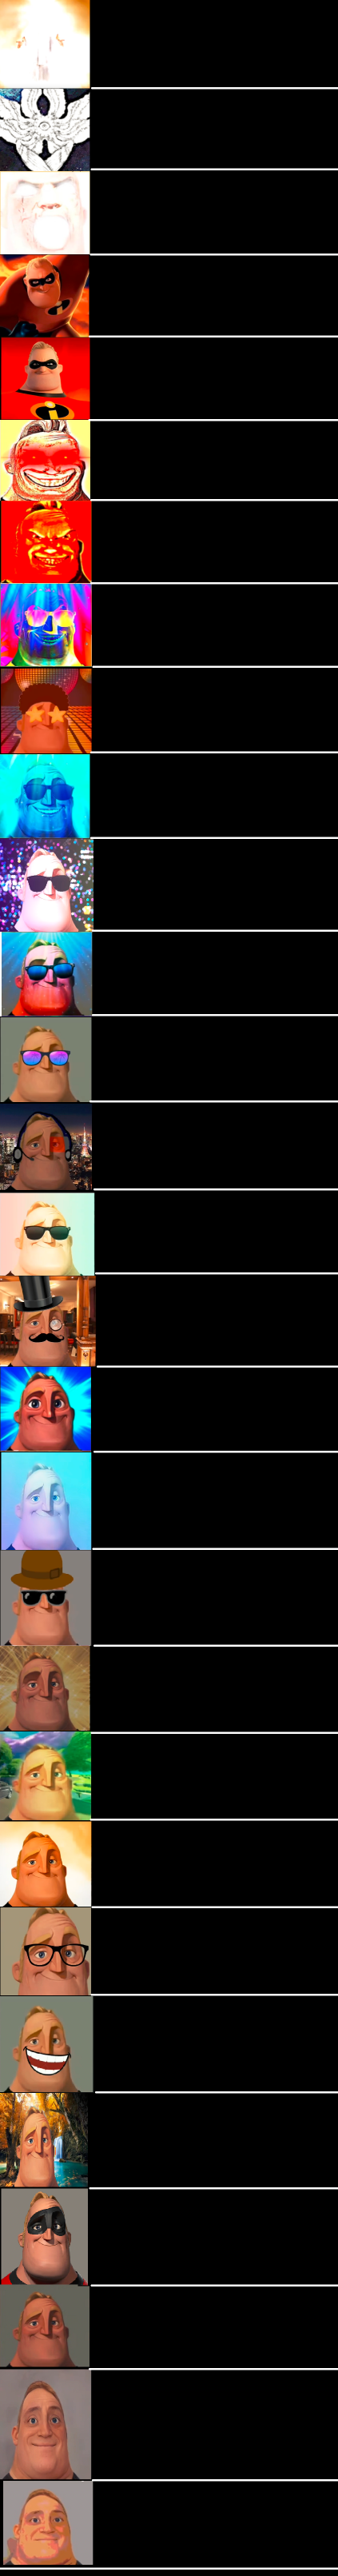 mr incredible becoming ultimate canny Blank Meme Template